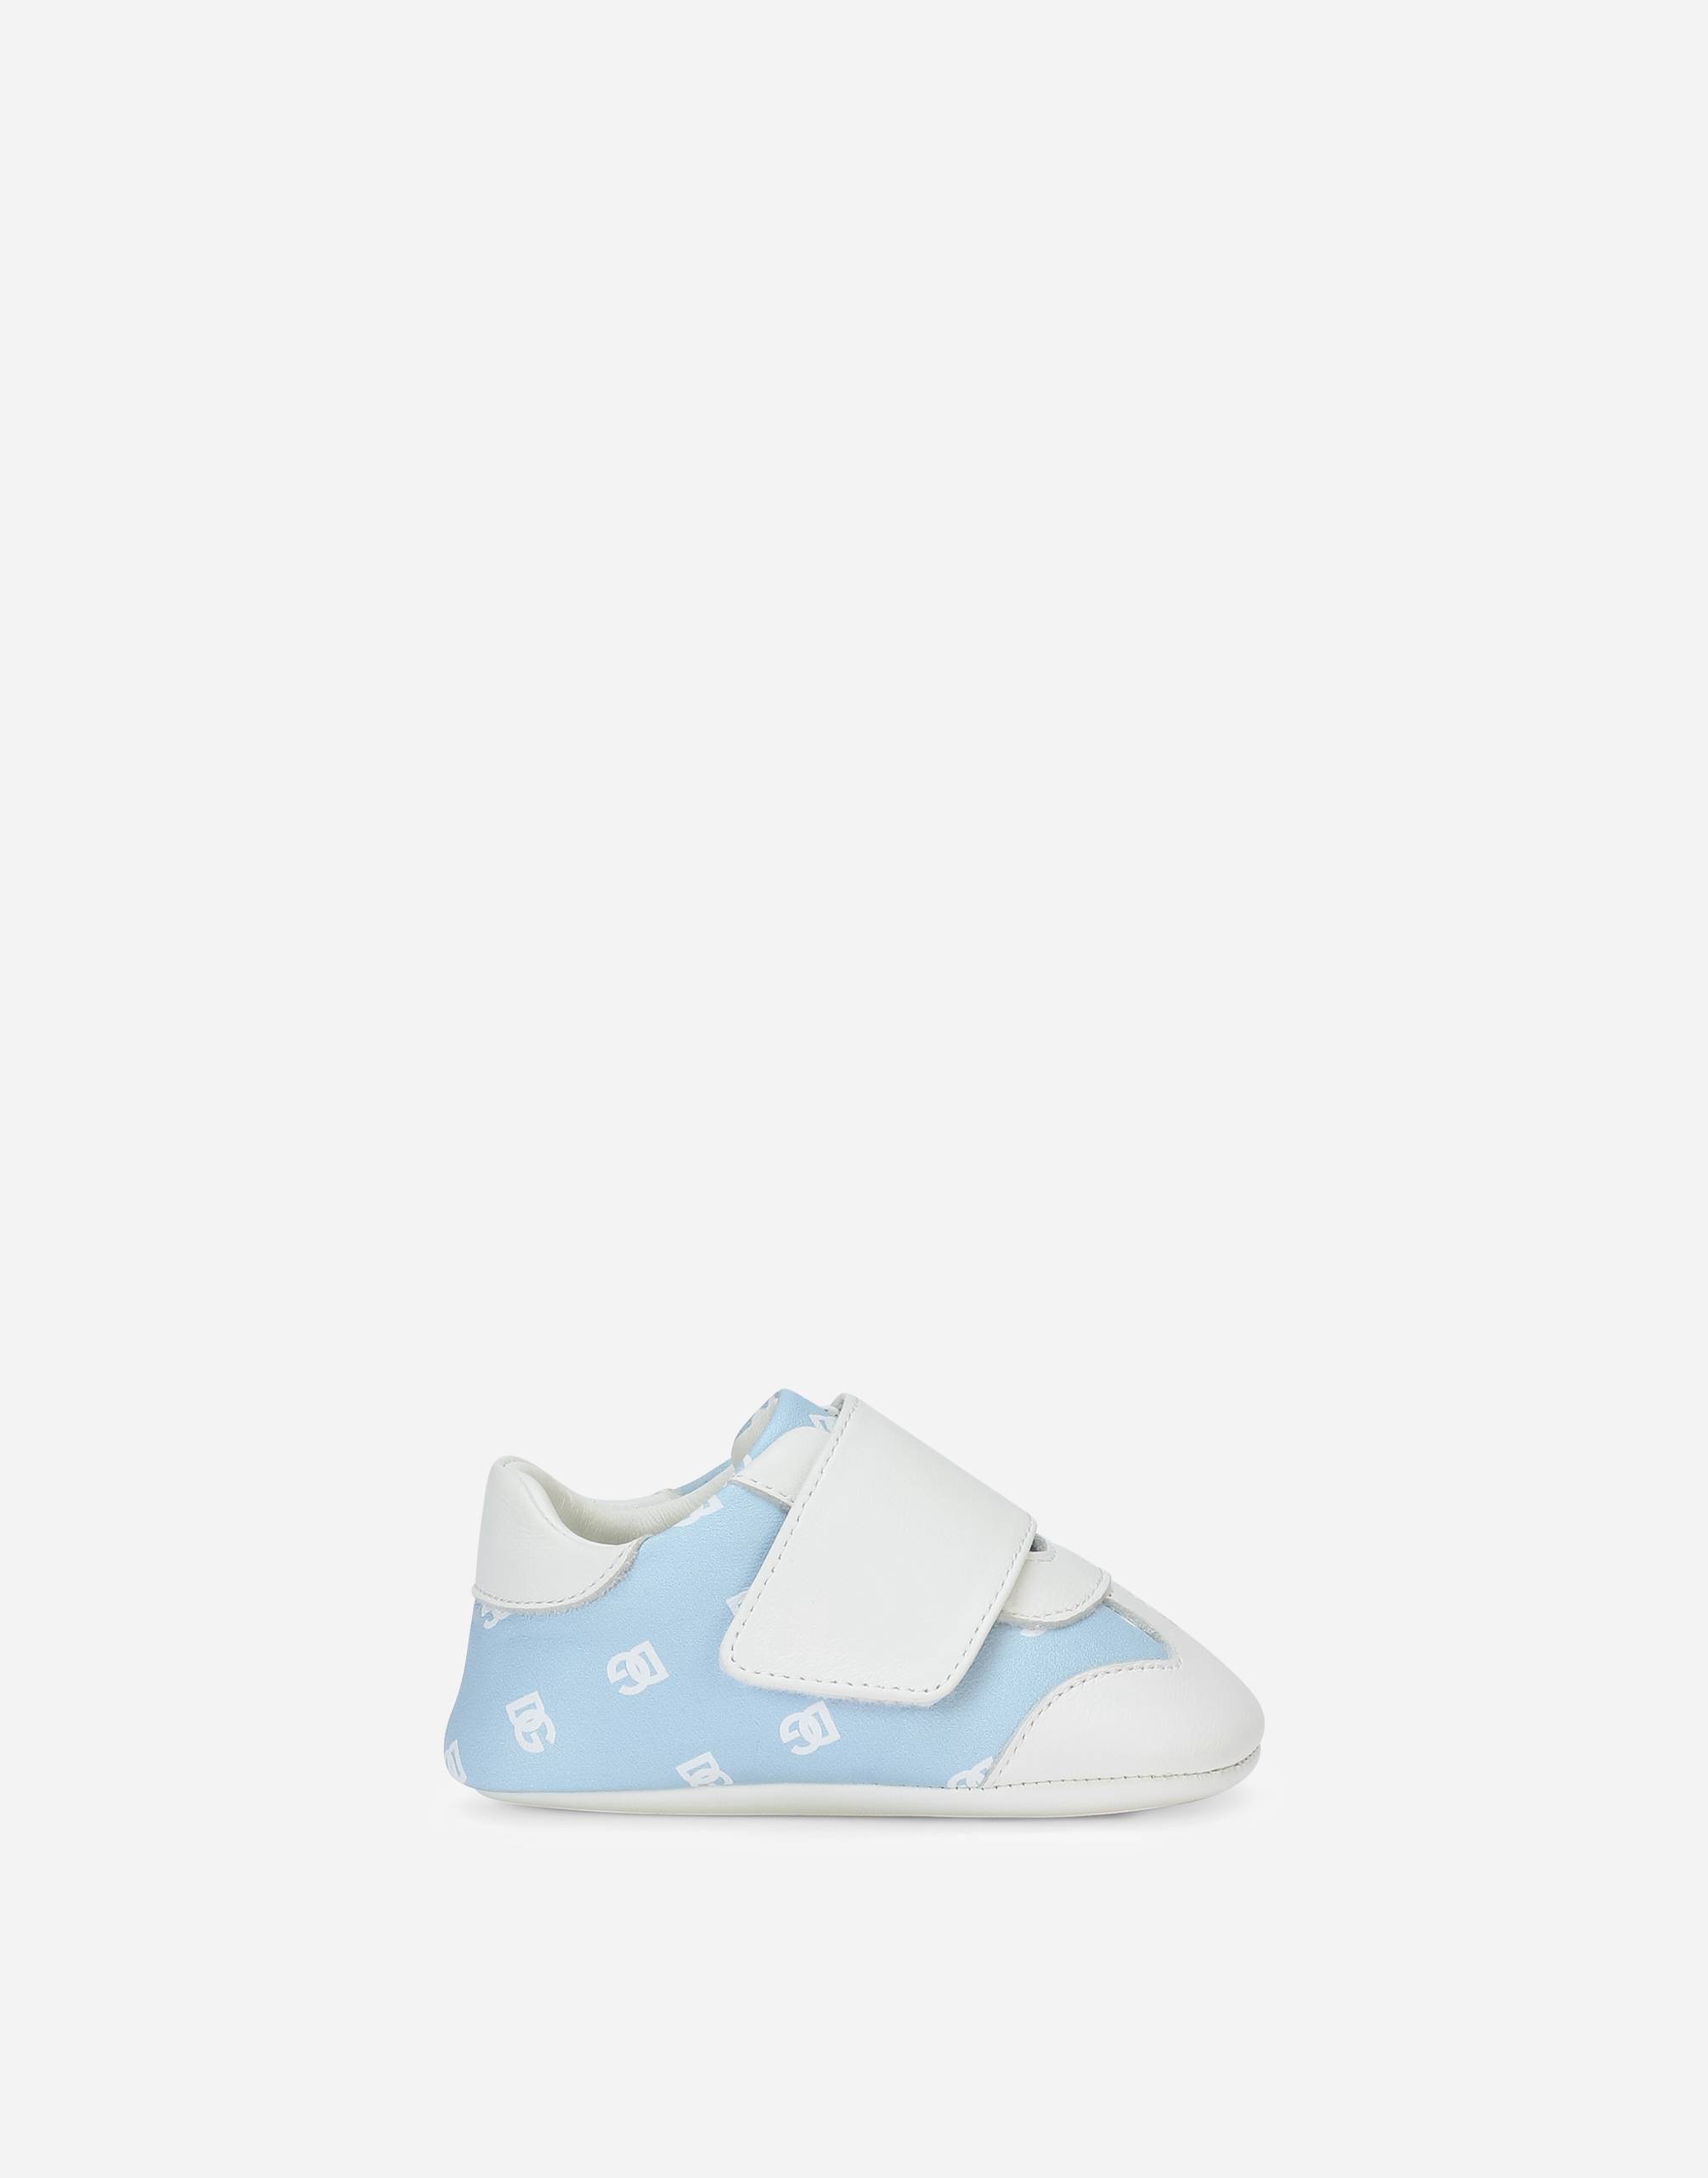 Dolce & Gabbana Babies' Nappa Leather Newborn Sneakers With Dg-logo Print In Azure